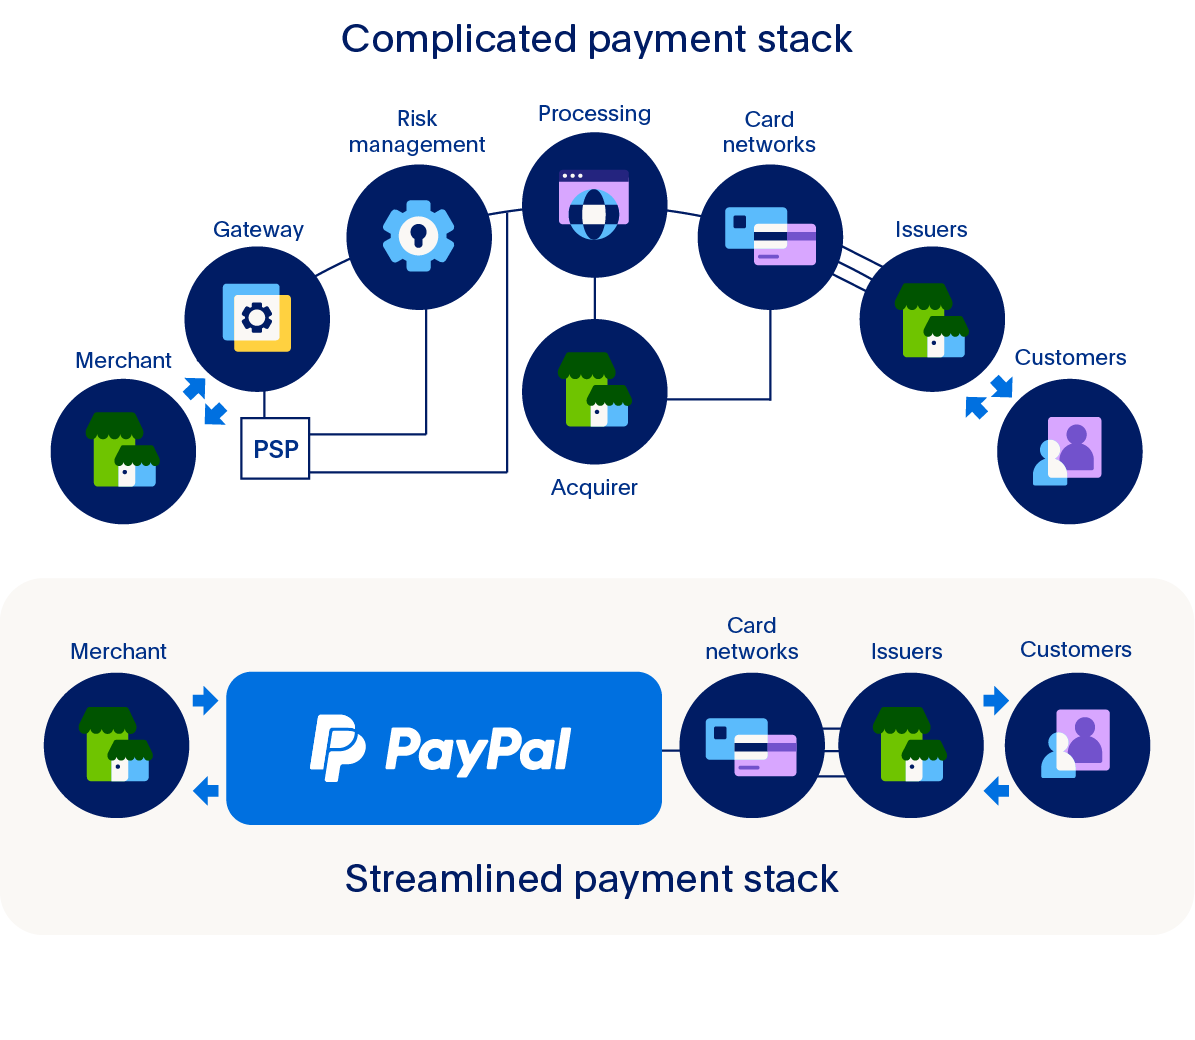 What is PayPal? - Tech Blog